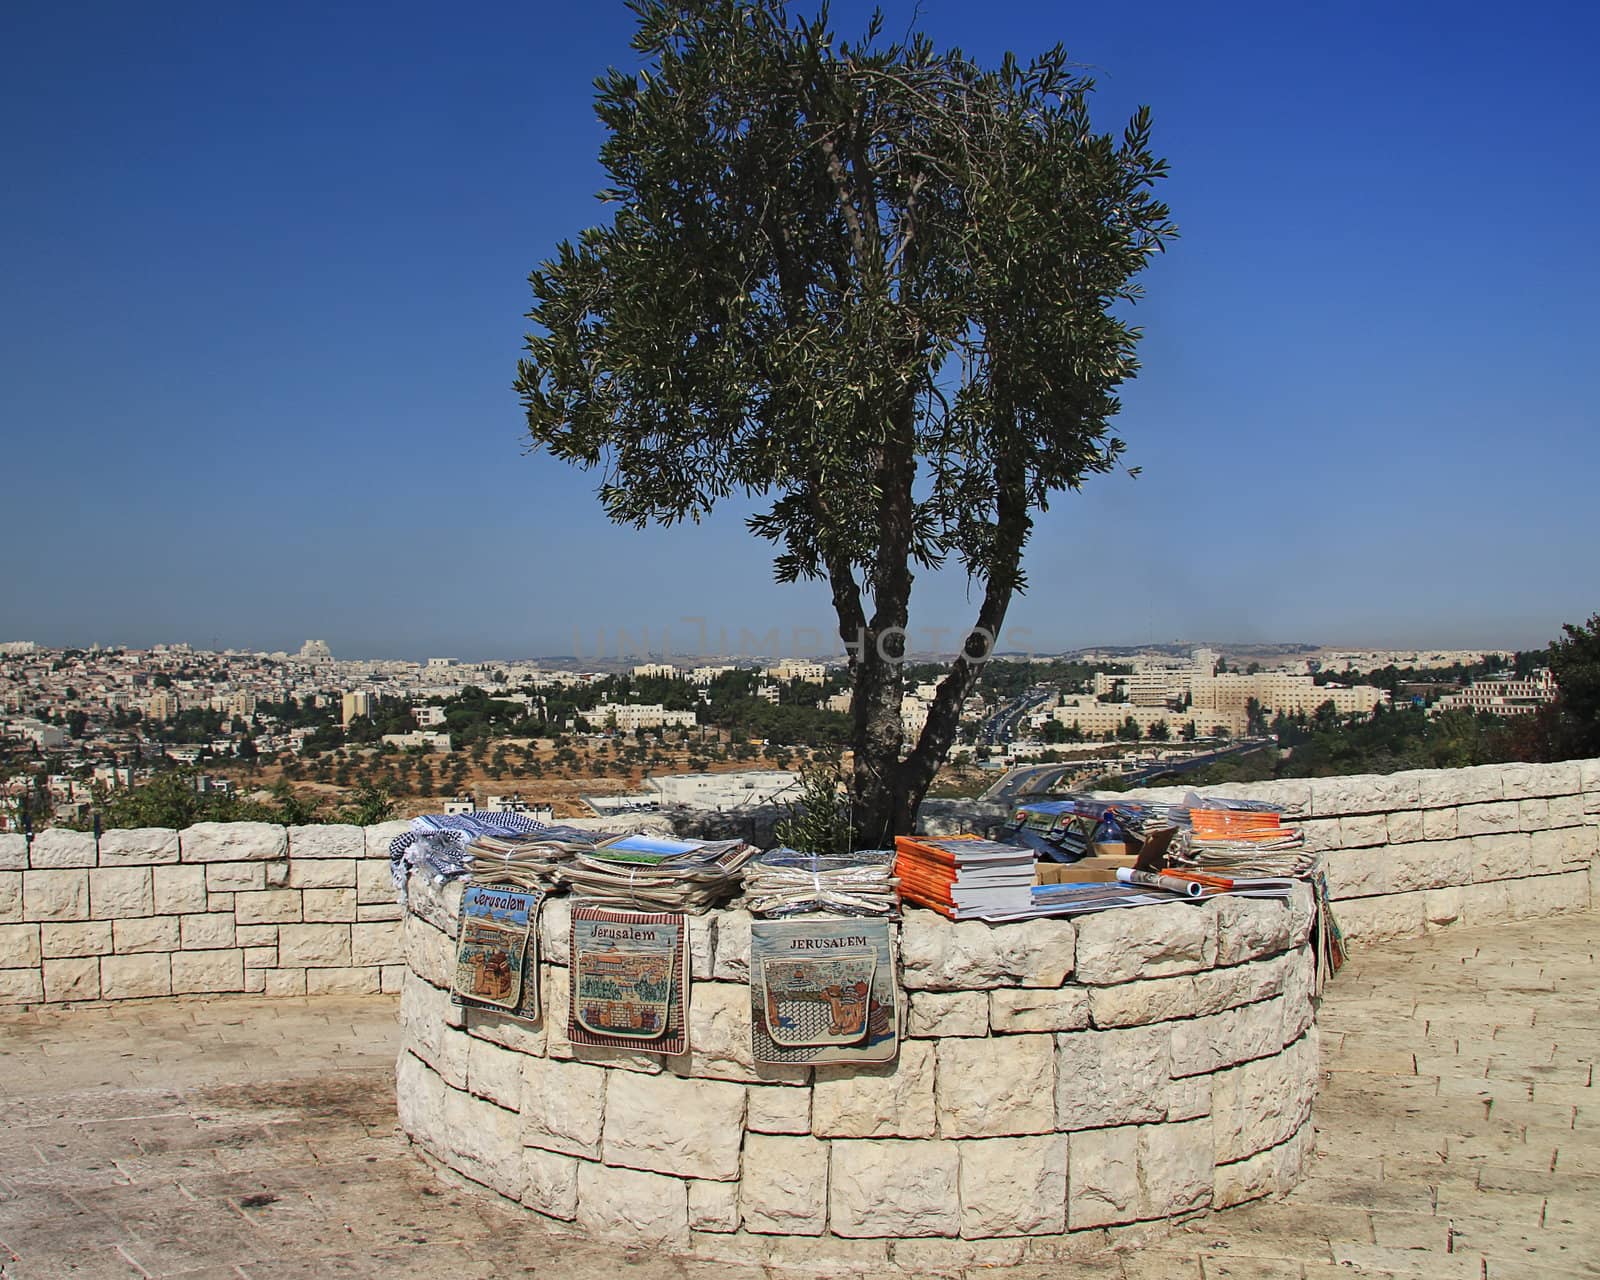 Mount of olives by snowturtle